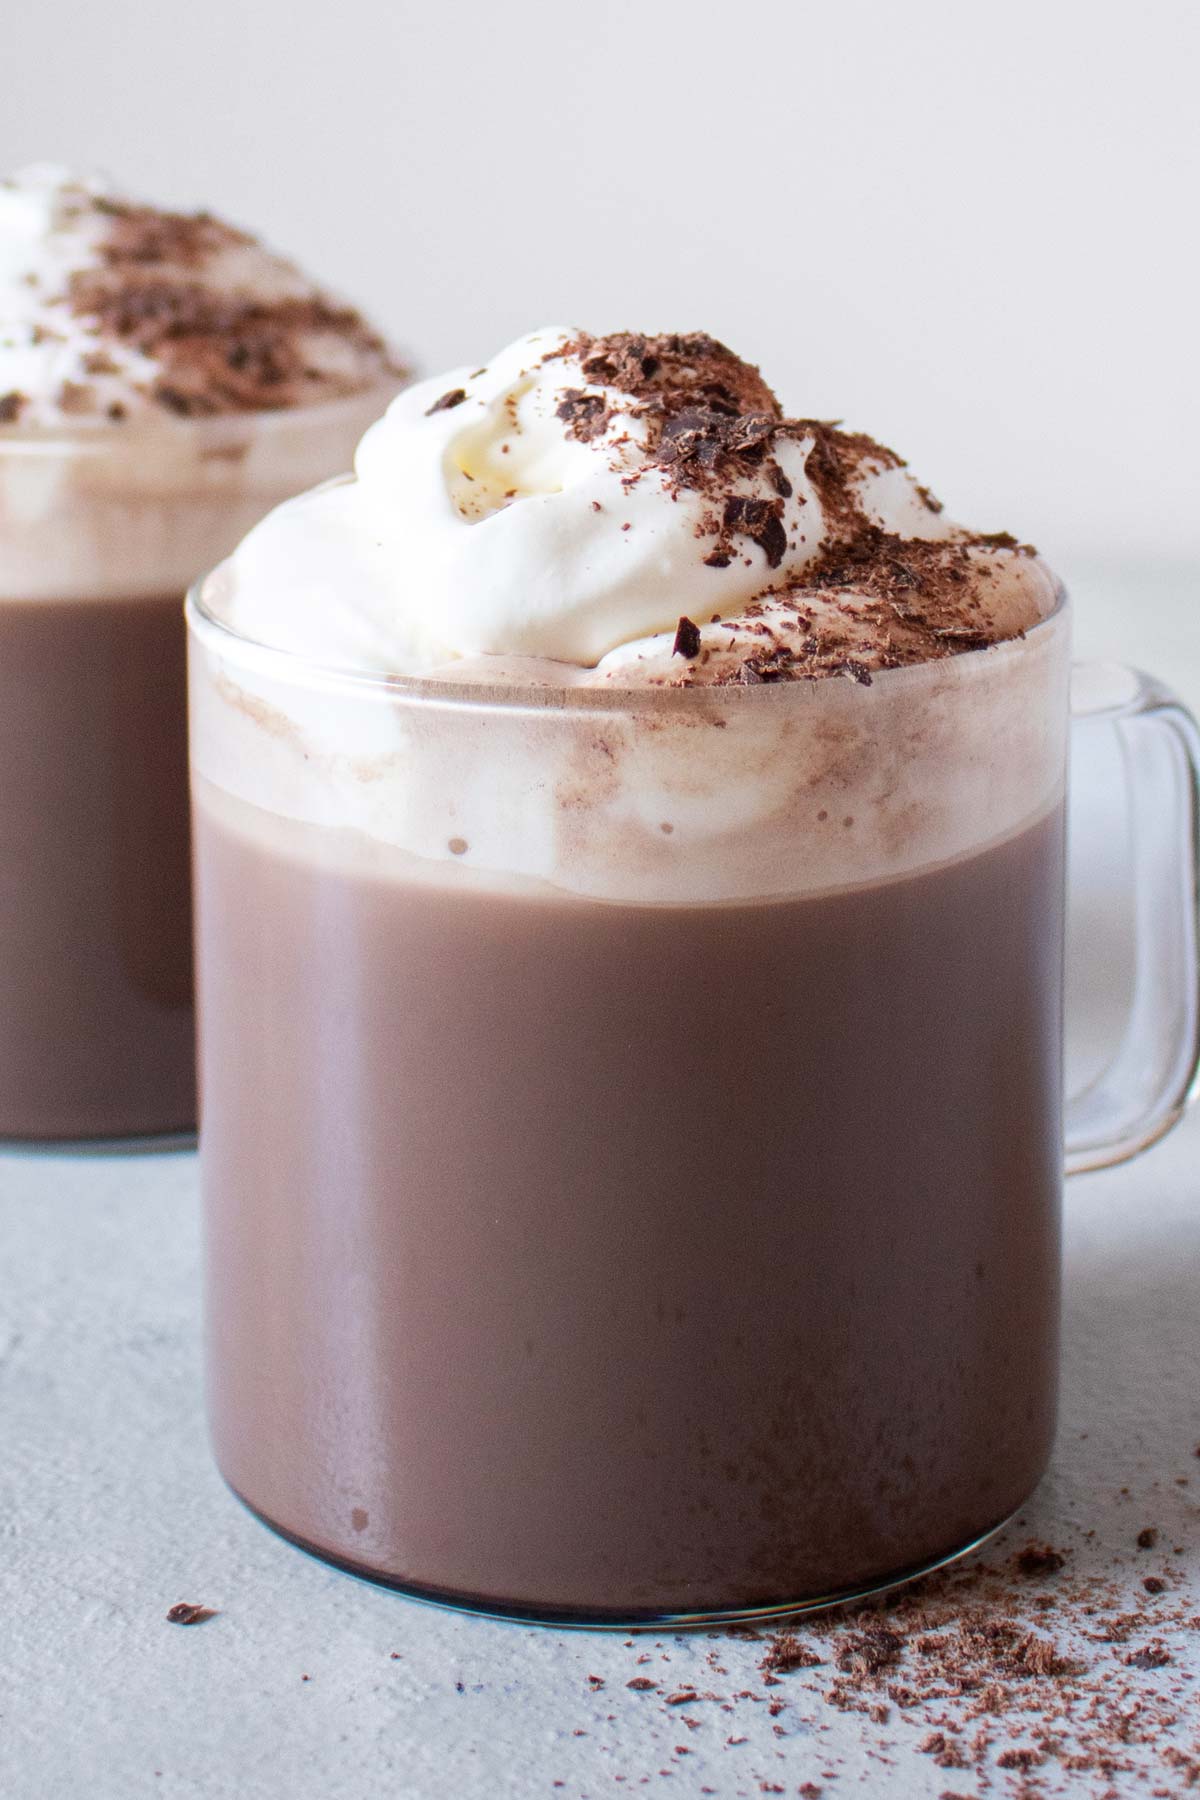 Two hot chocolates in glass mugs with whipped cream and grated chocolate.